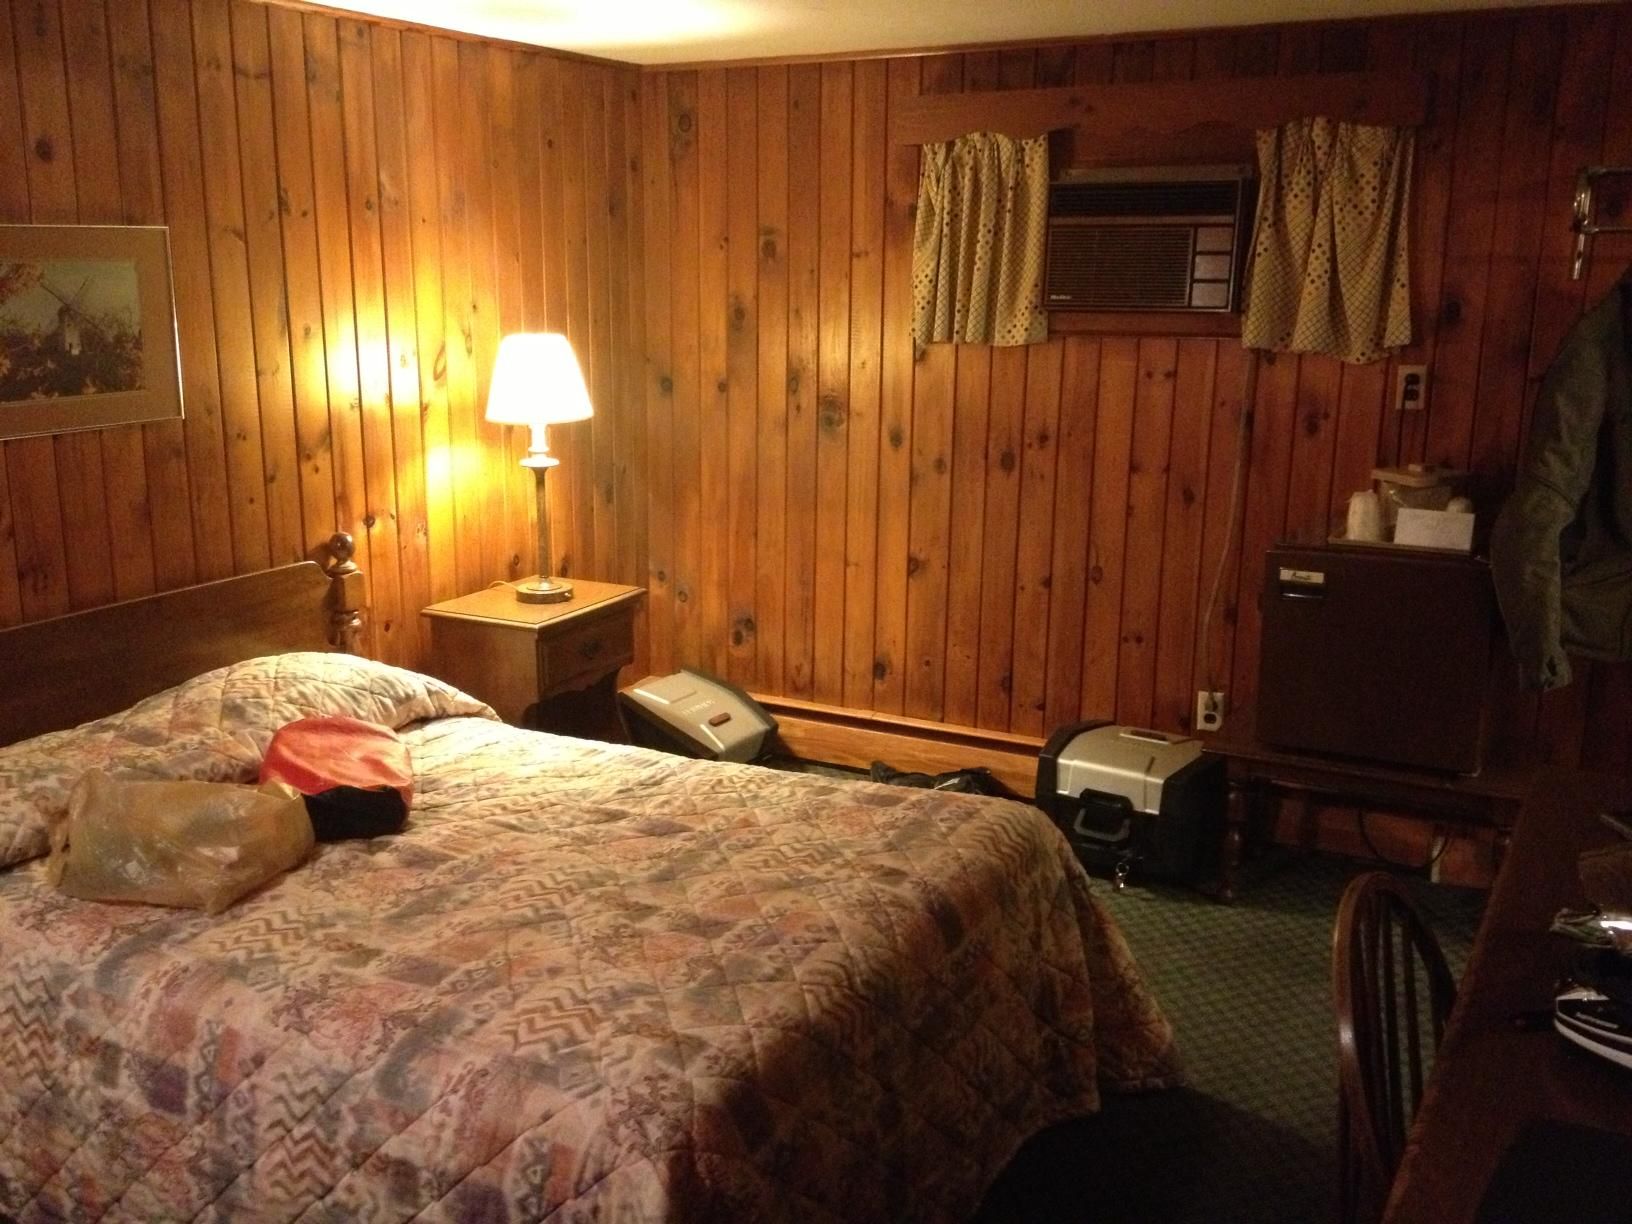 The picture does Gorham Motor inn more justice than it deserves